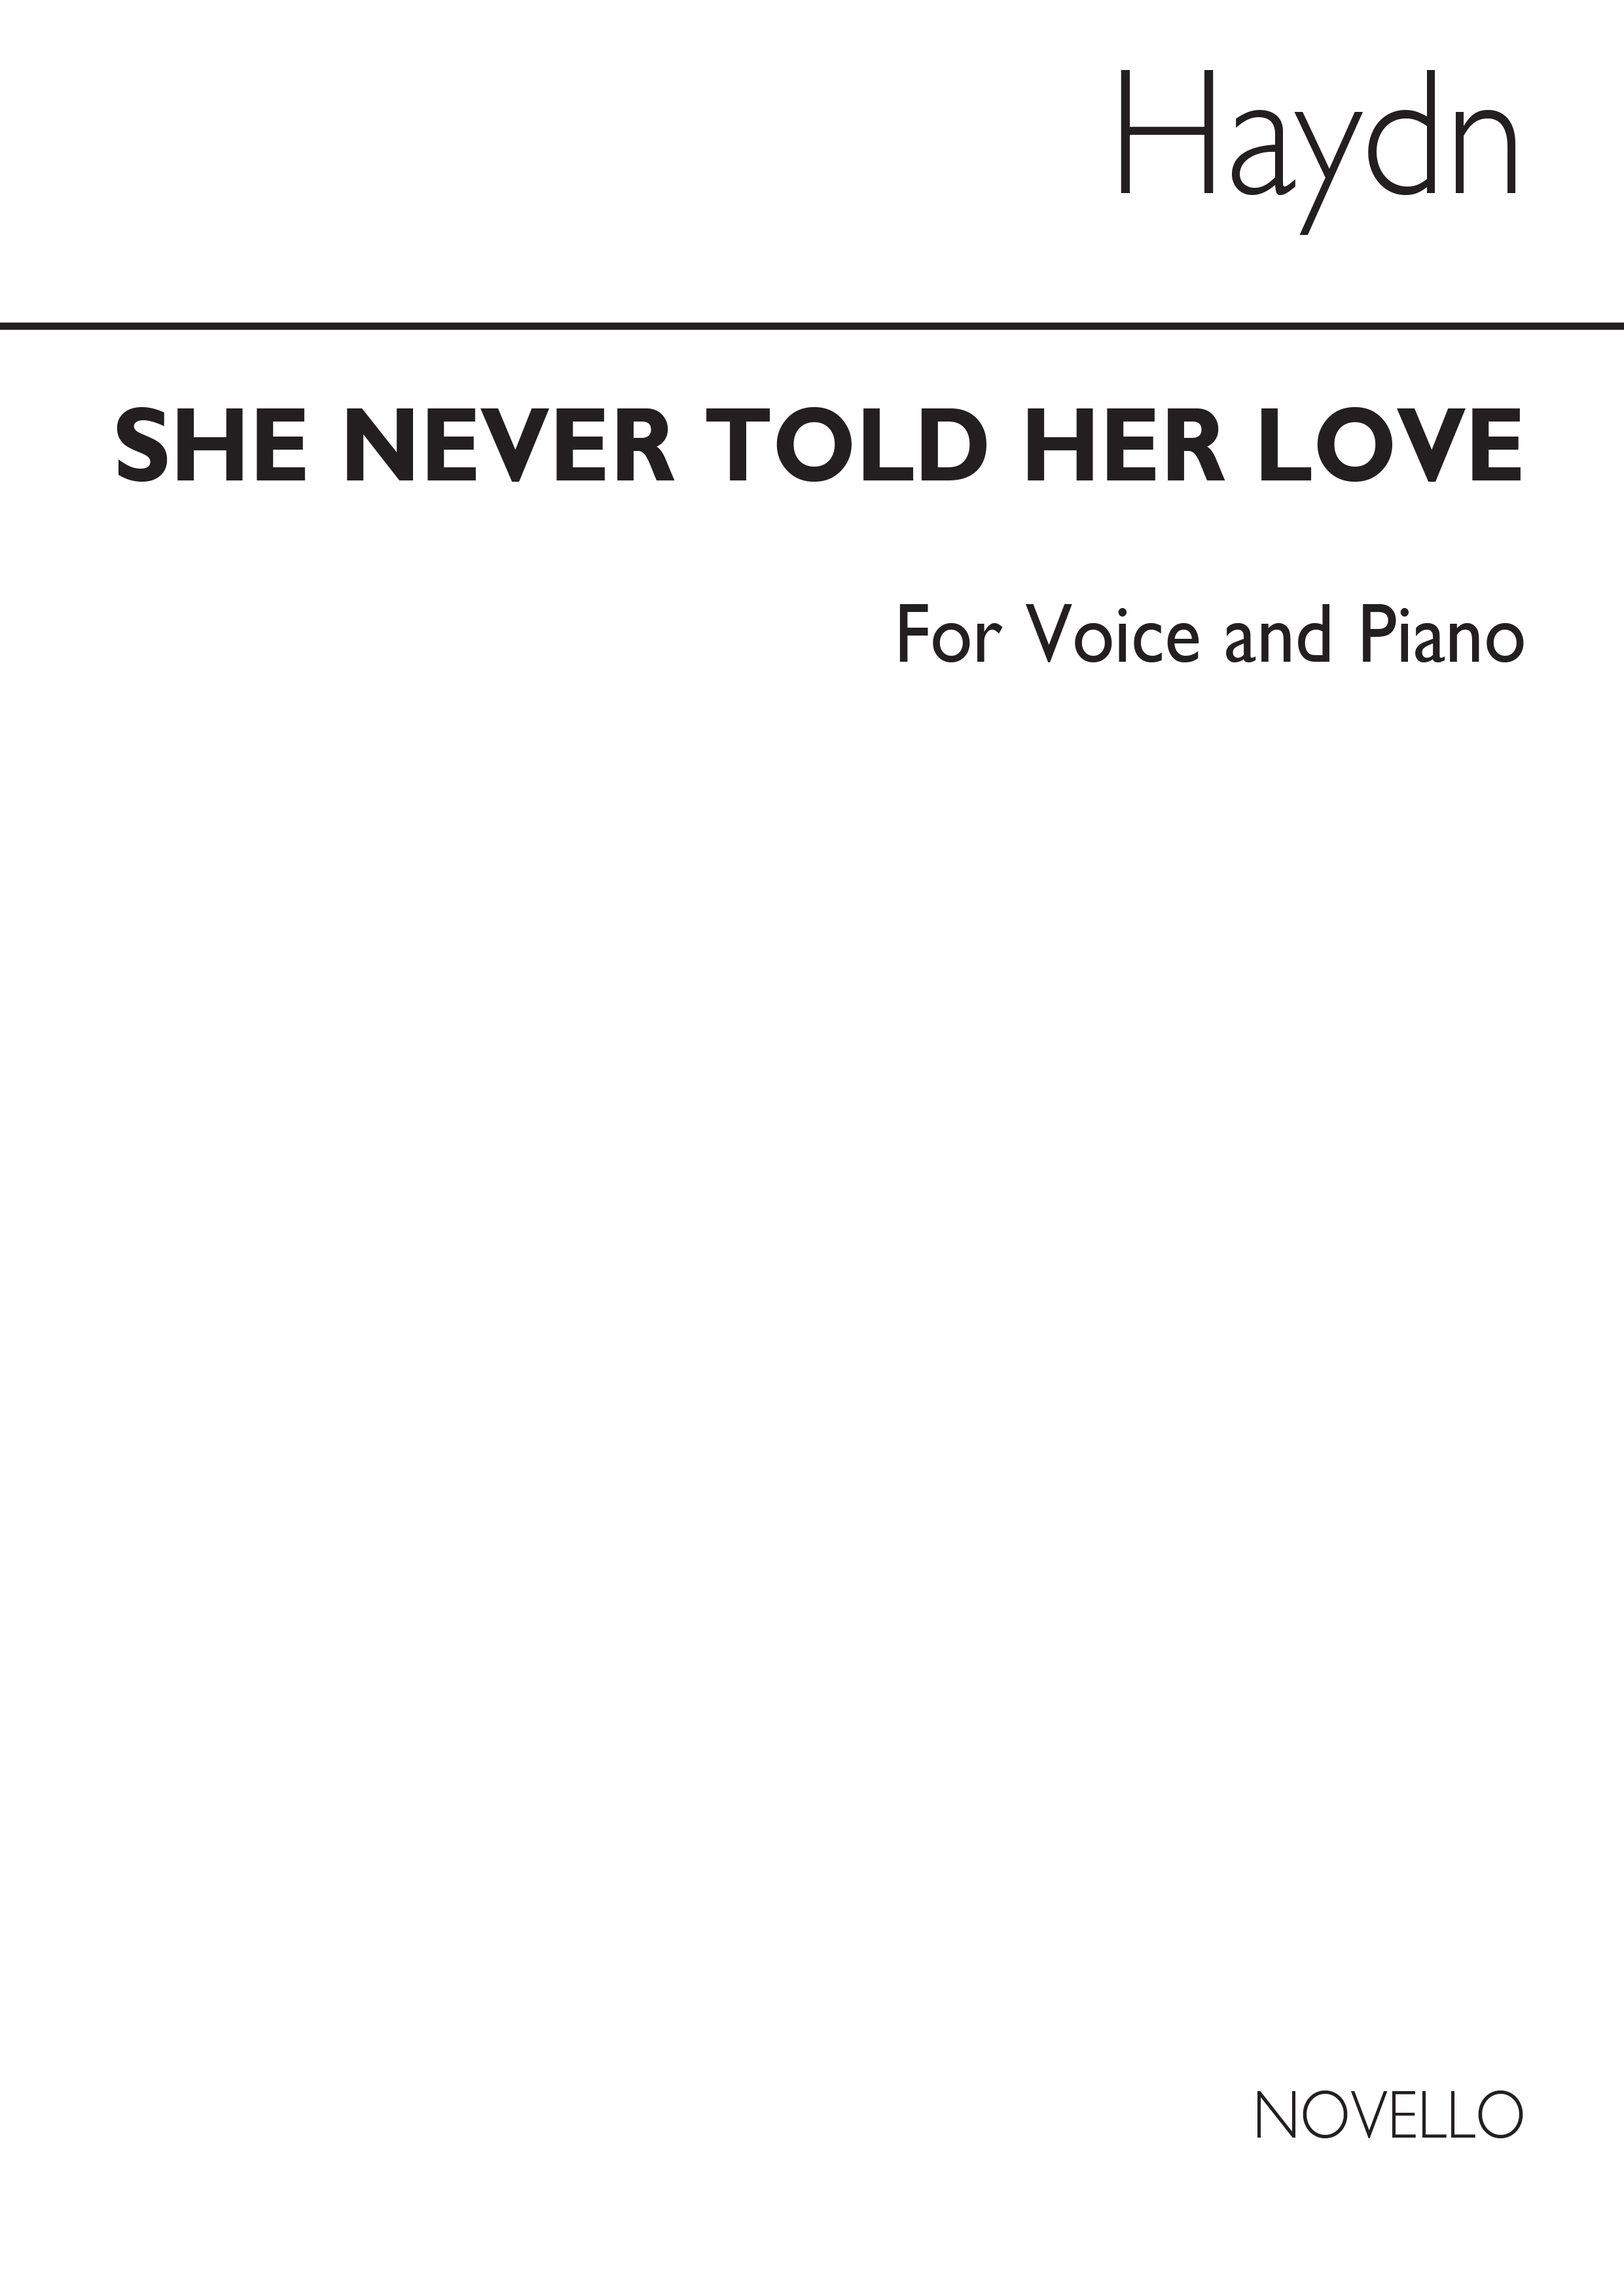 Franz Joseph Haydn: Haydn She Never Told Her Love In F Low Vce/Pf: Voice: Vocal